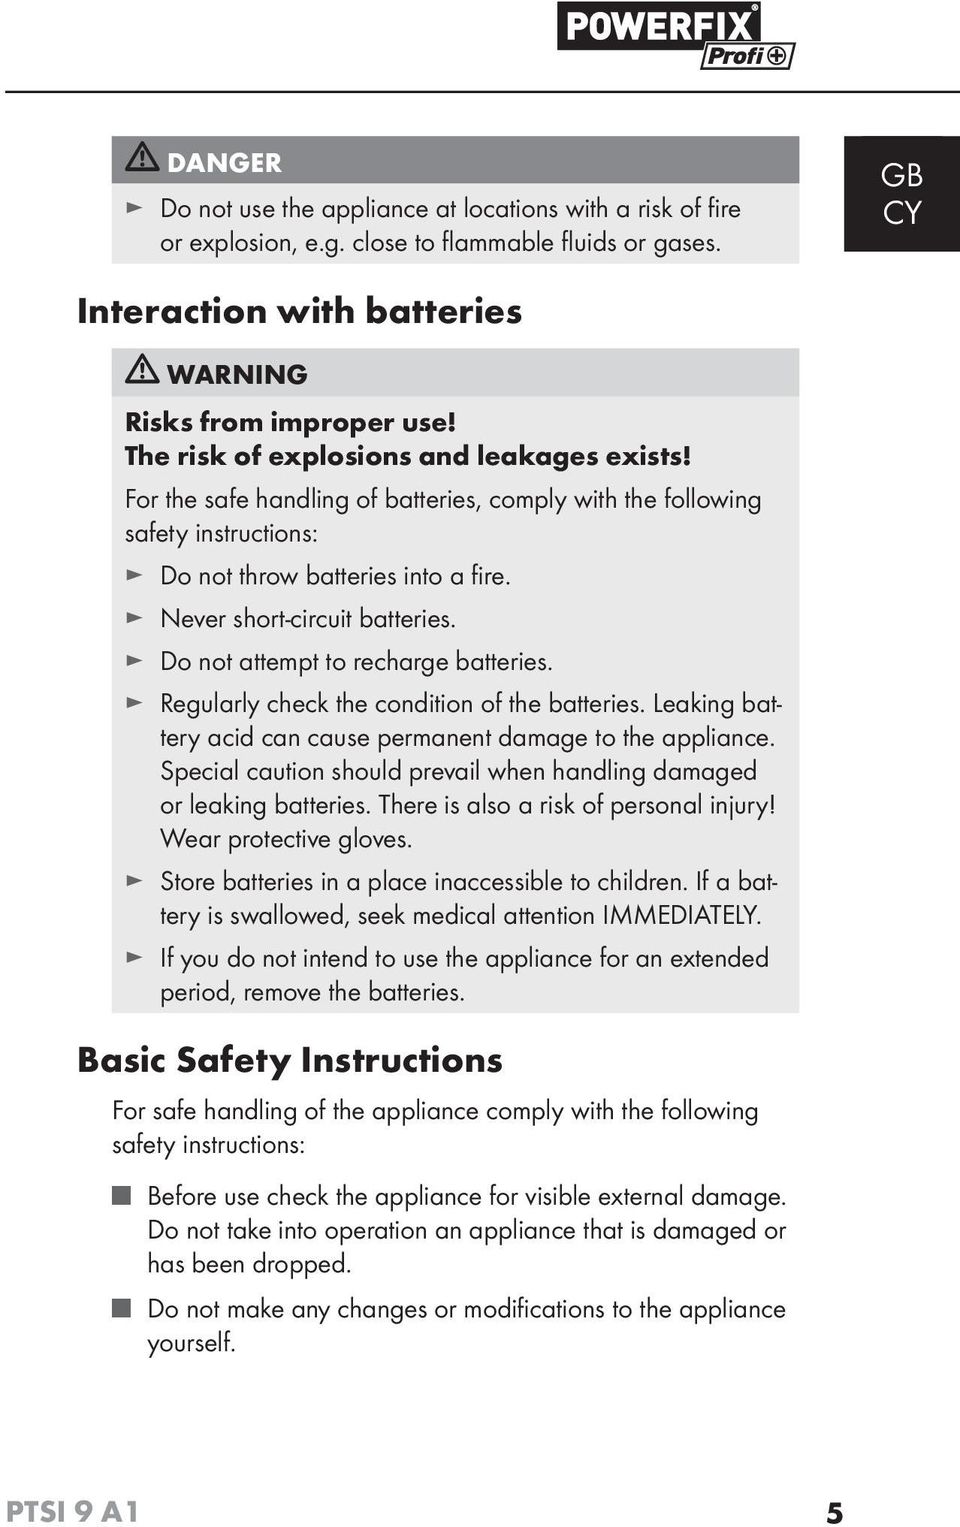 Do not attempt to recharge batteries. Regularly check the condition of the batteries. Leaking battery acid can cause permanent damage to the appliance.